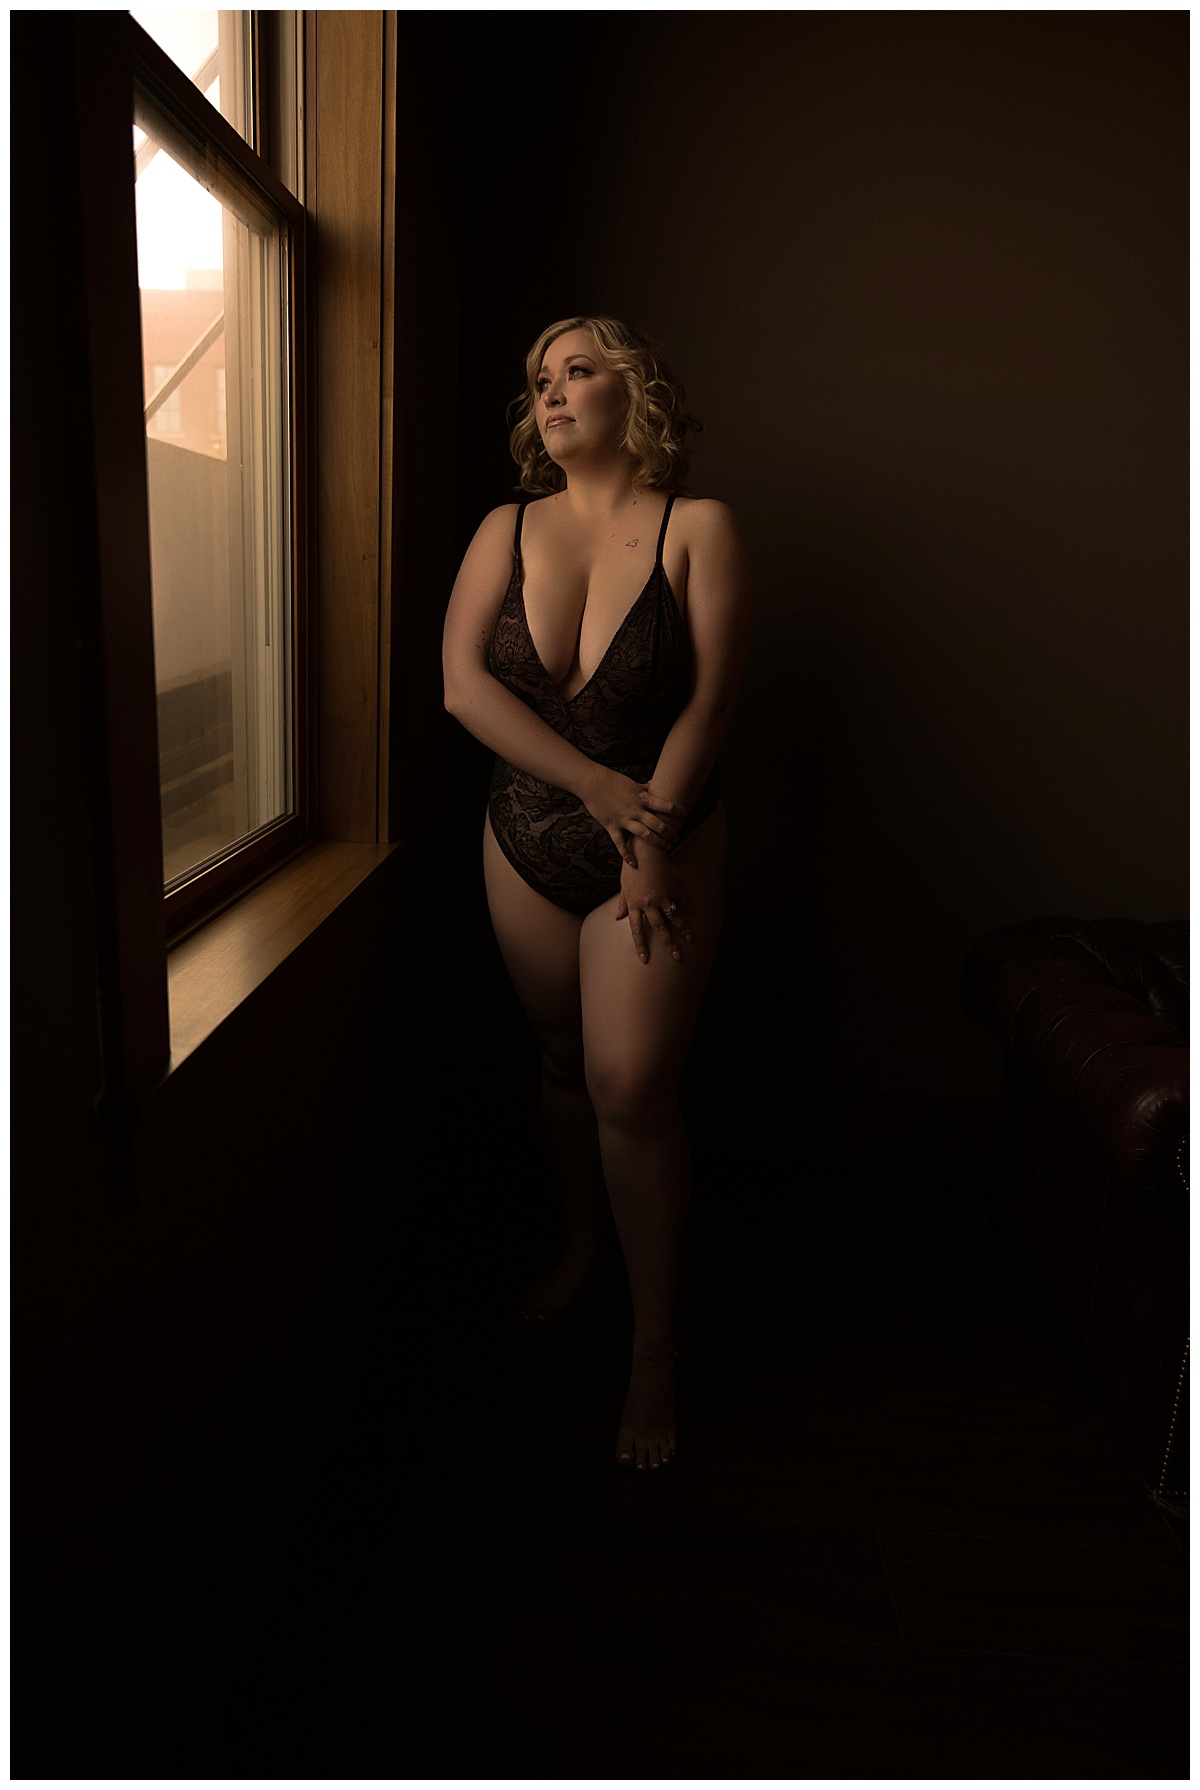 Person stands in front of a mirror wearing black lingerie for Sioux Falls Boudoir Photographer